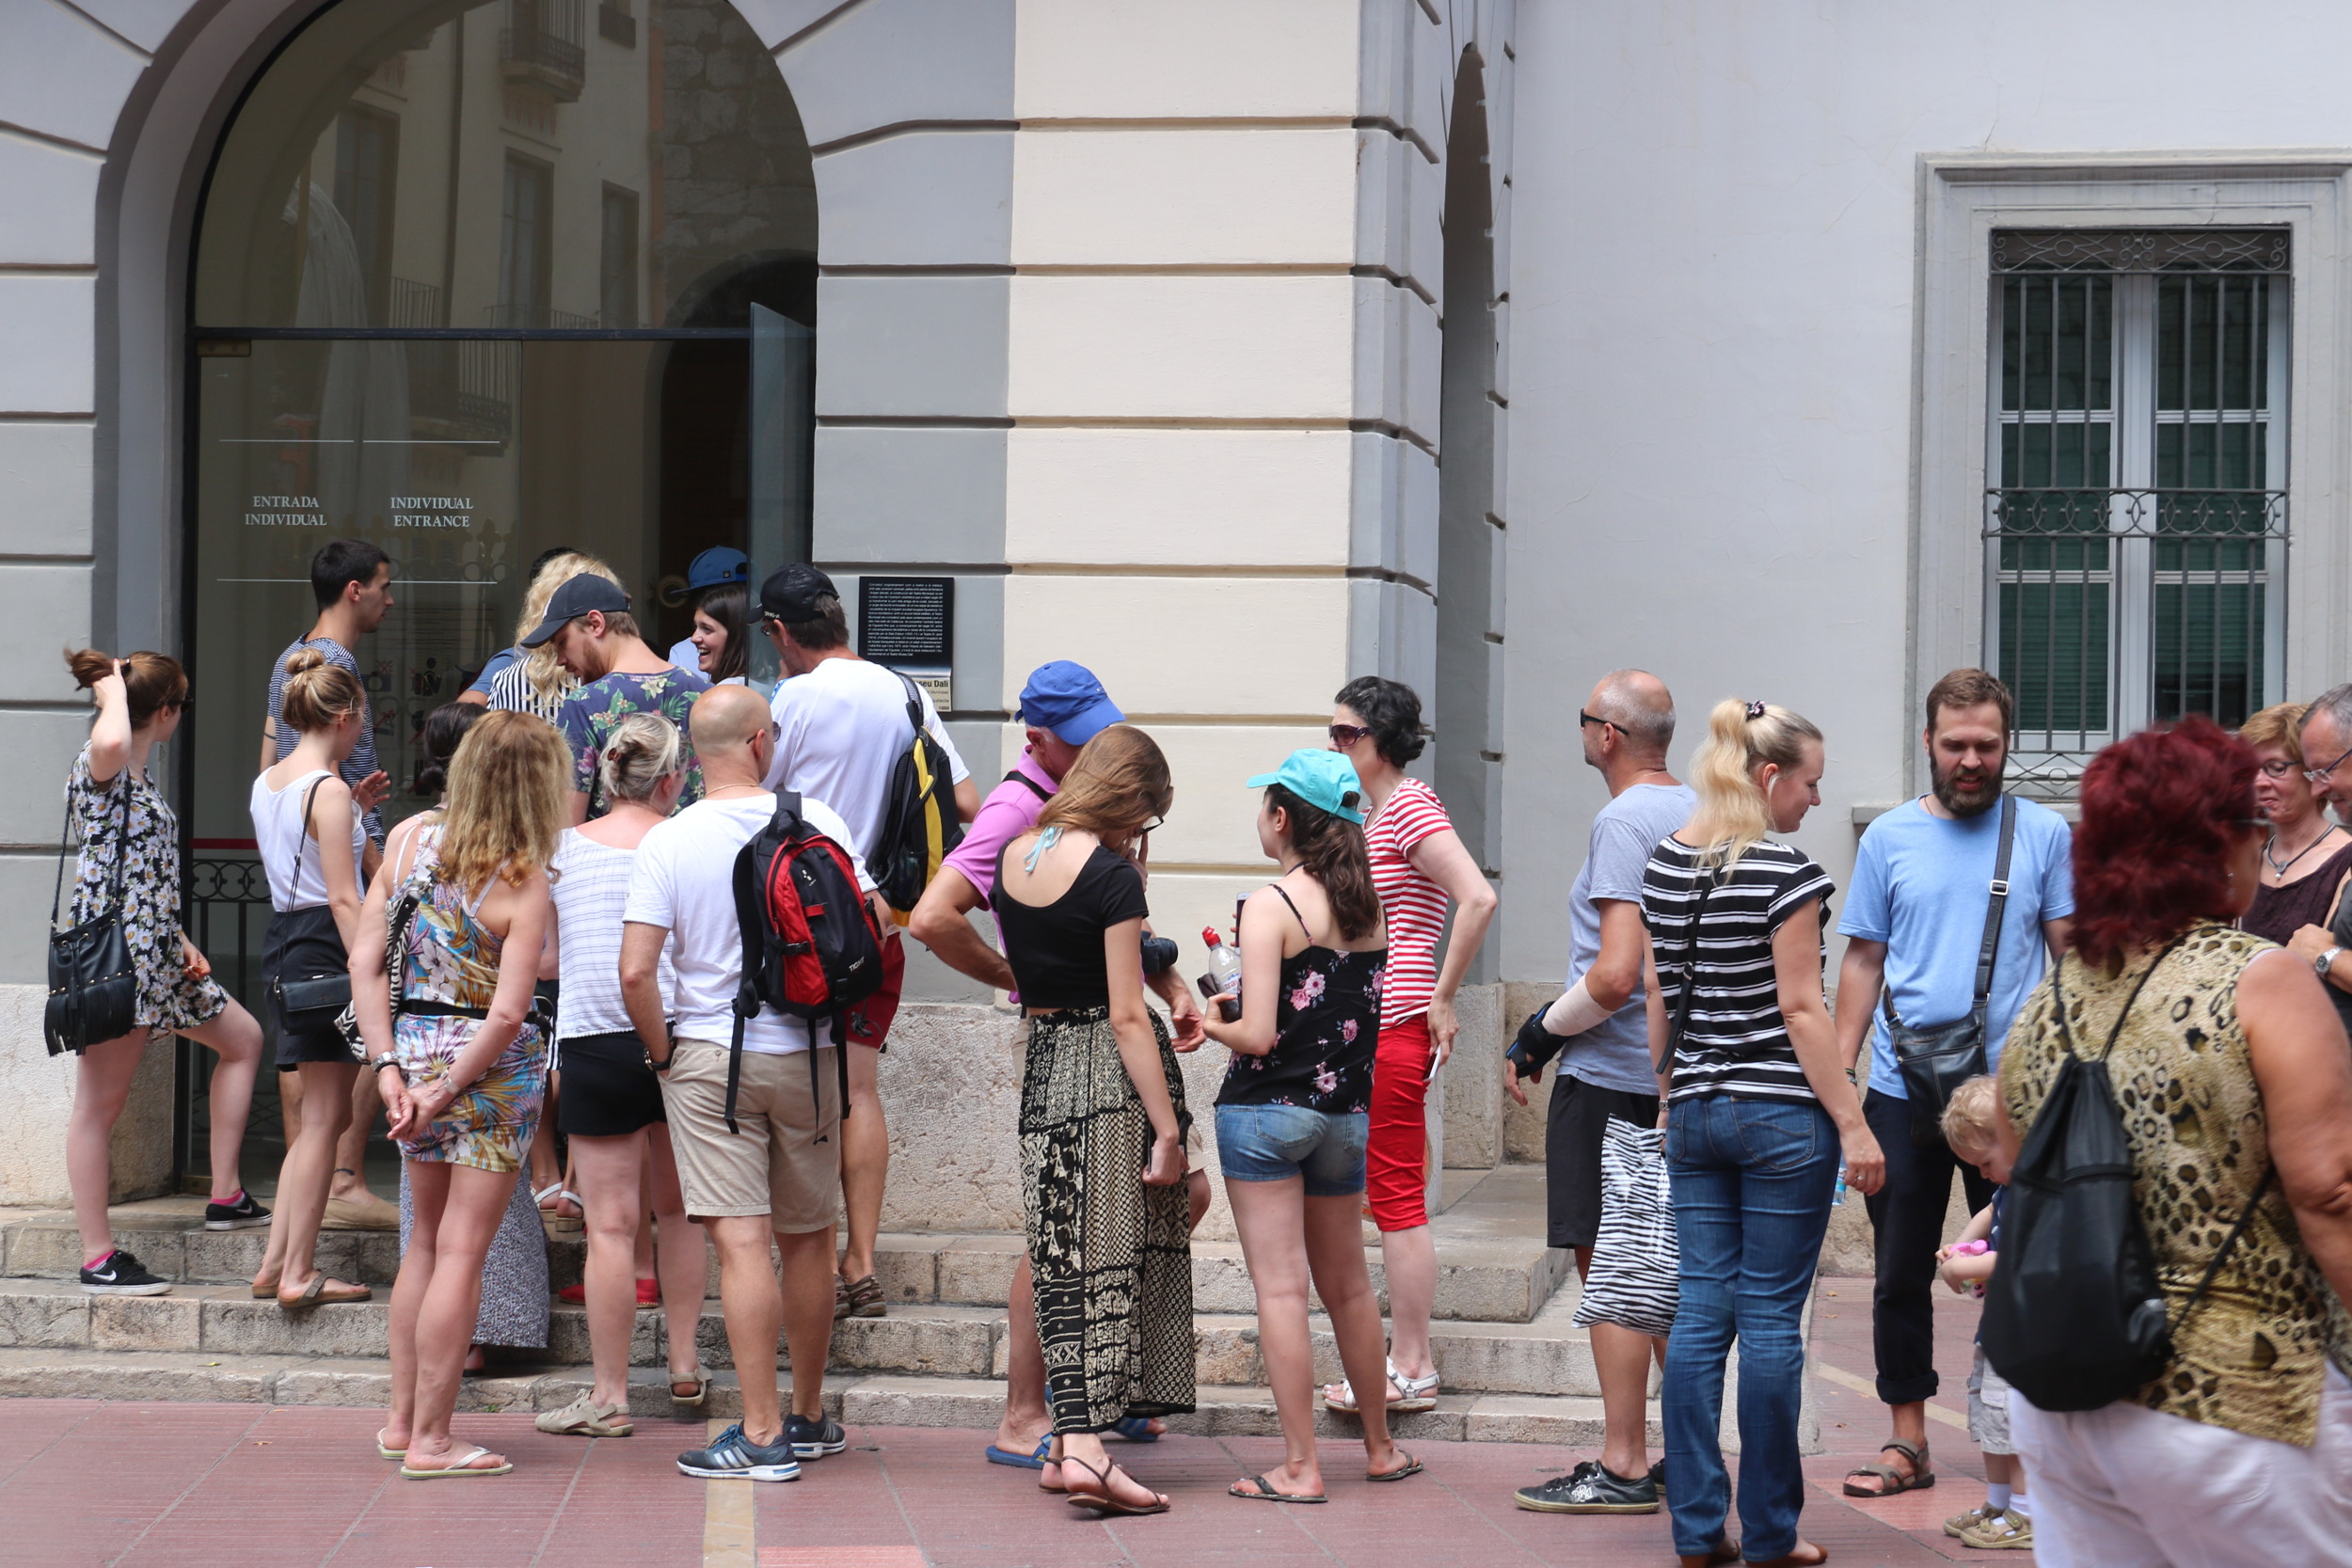 Access to the Dalí Theater-Museum with a line of people waiting to enter on July 13 2017 (by Marina López)